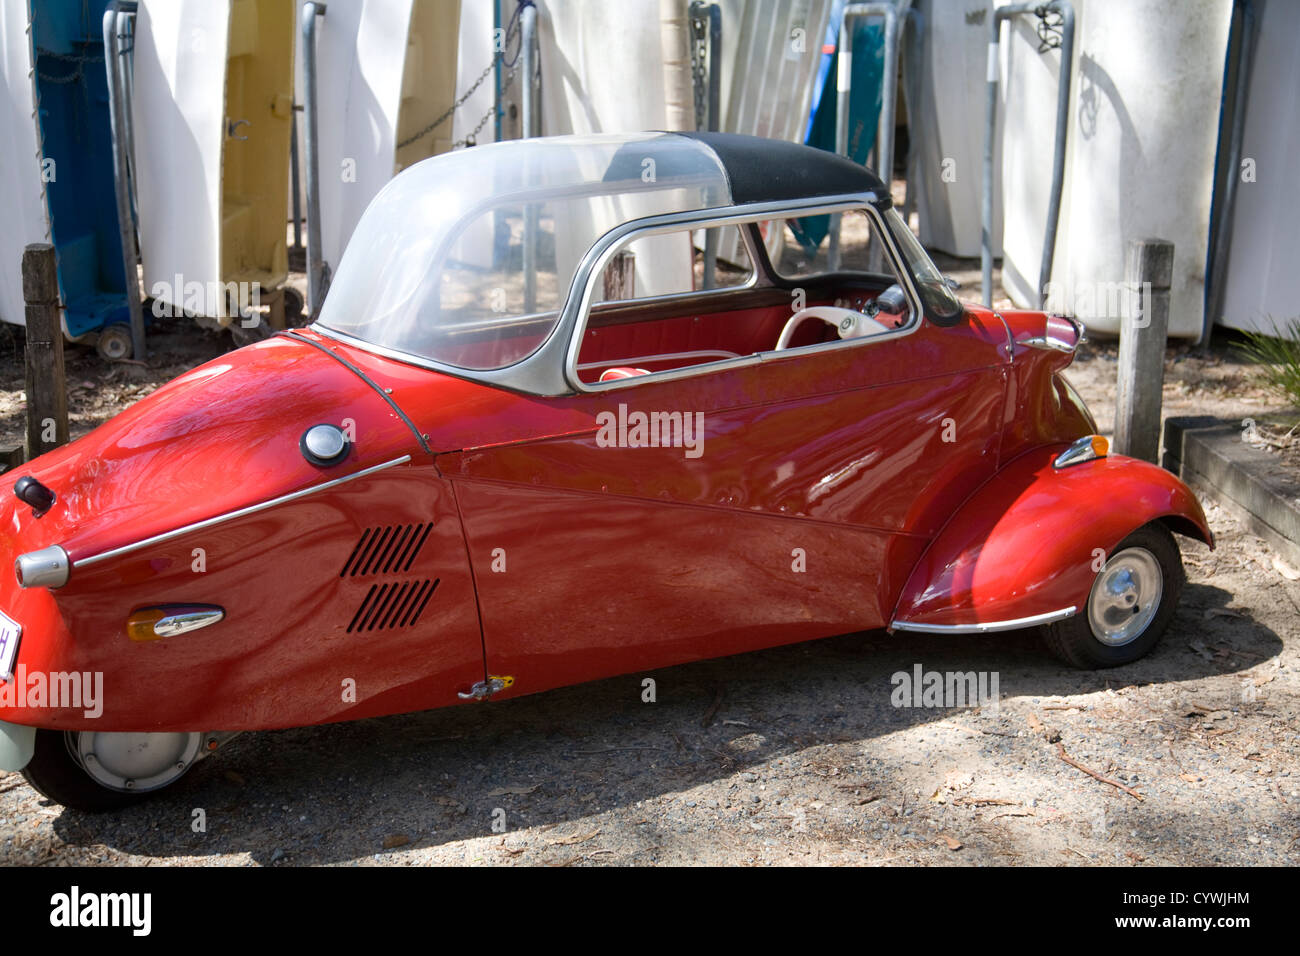 Messerschmitt kr200 car parked by stored boats in clareville,sydney Stock Photo